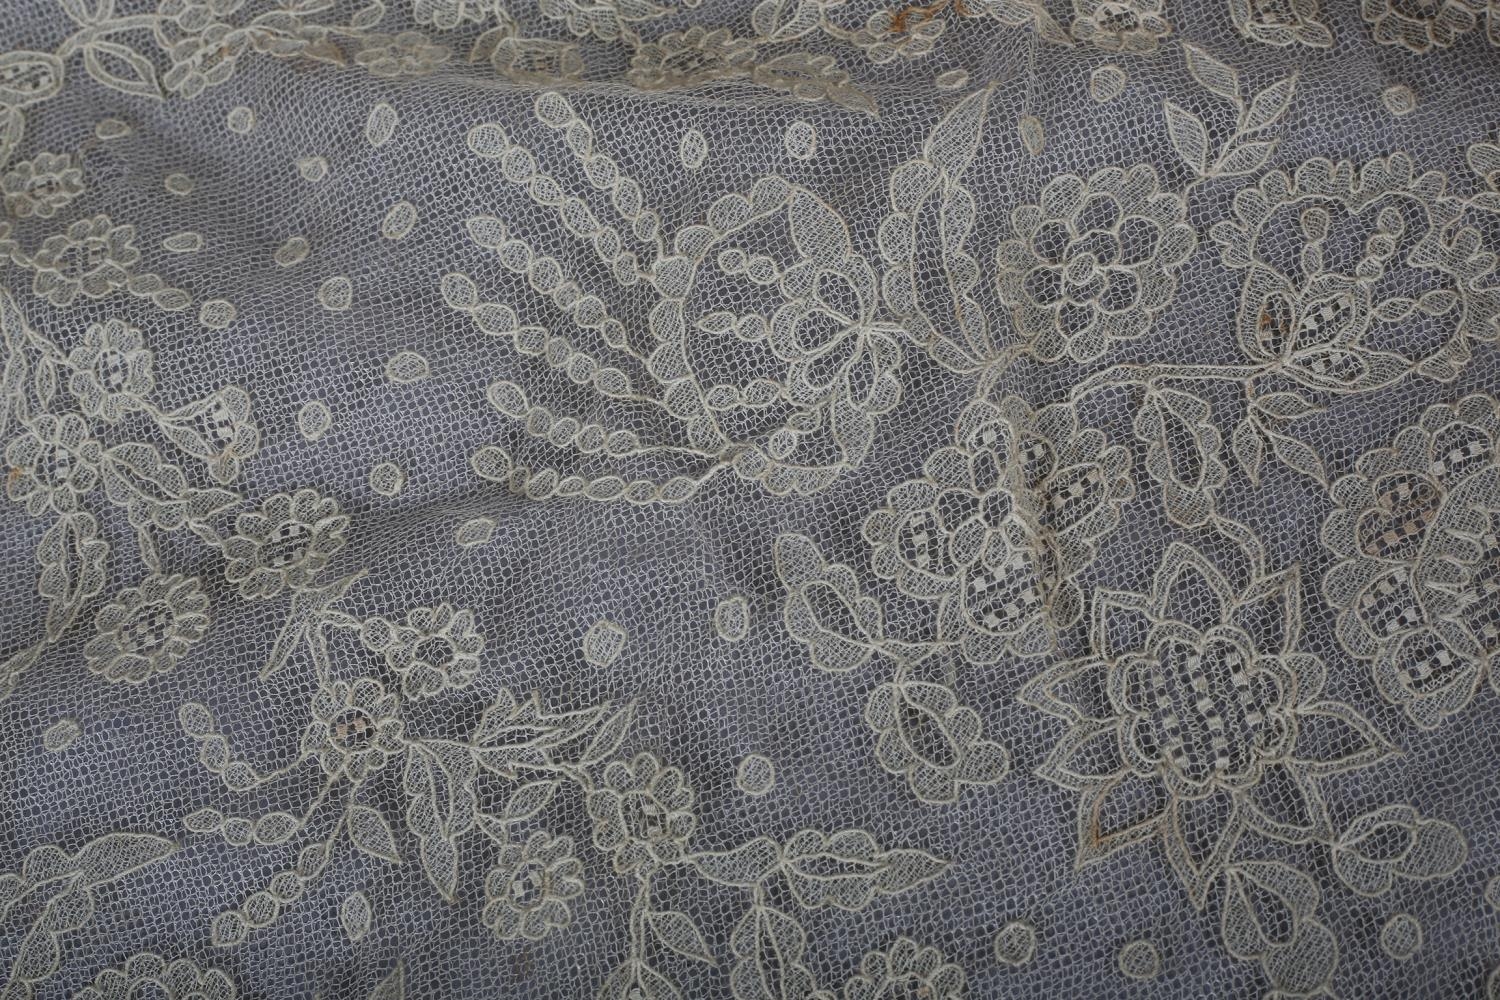 A very fine Limerick wedding veil, 19th century, with detailed fillings, floral design, backed in - Image 3 of 5